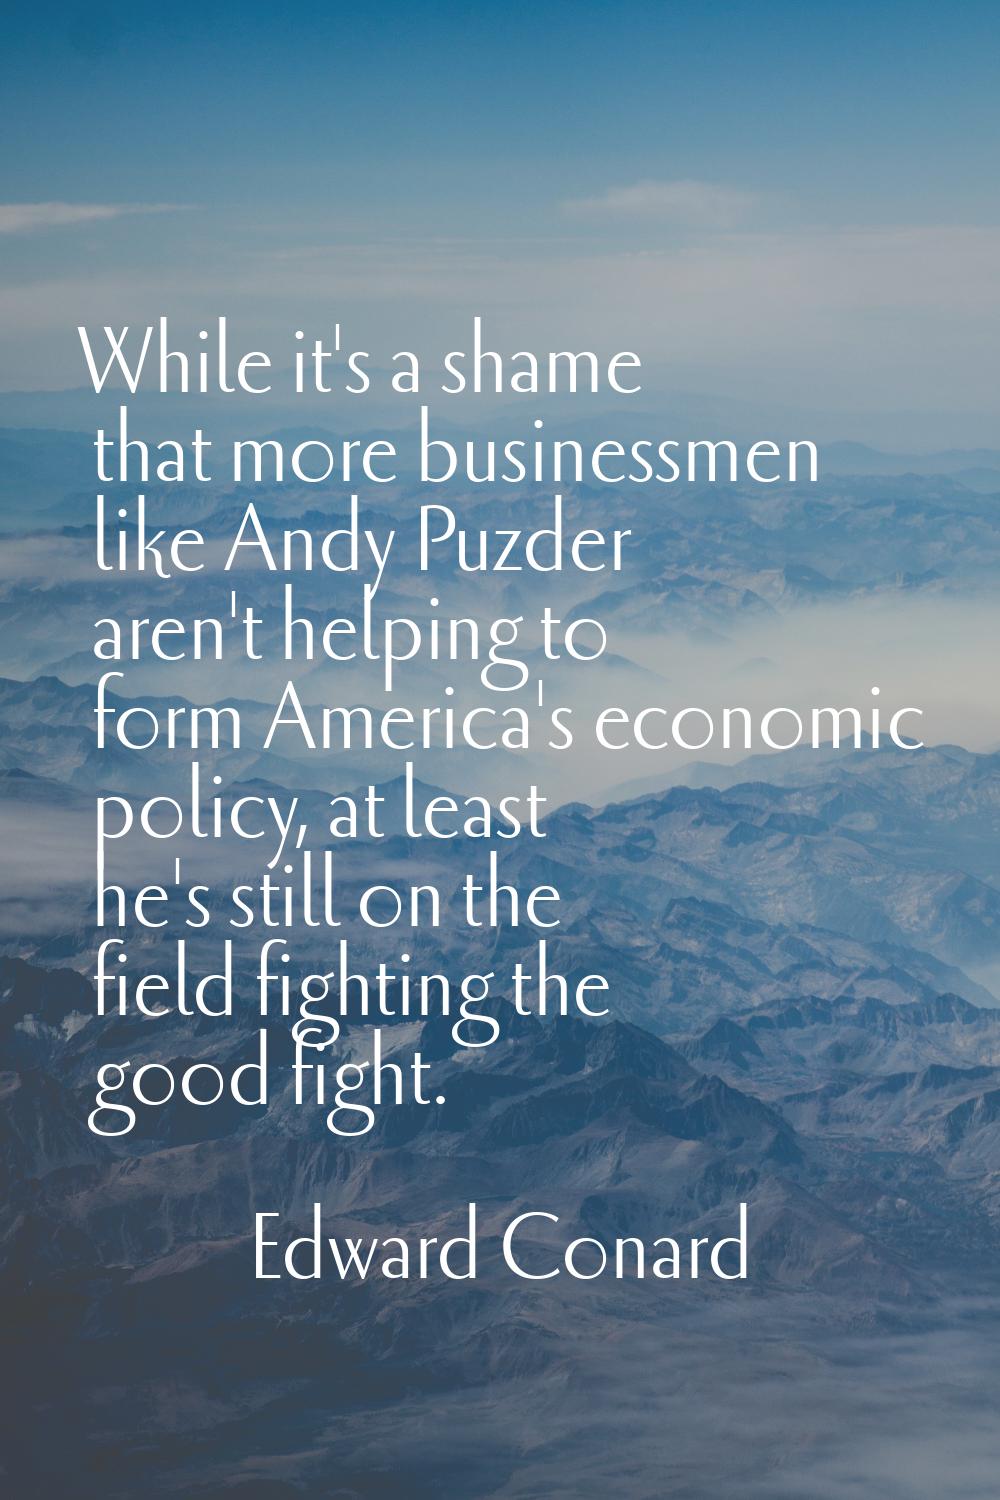 While it's a shame that more businessmen like Andy Puzder aren't helping to form America's economic